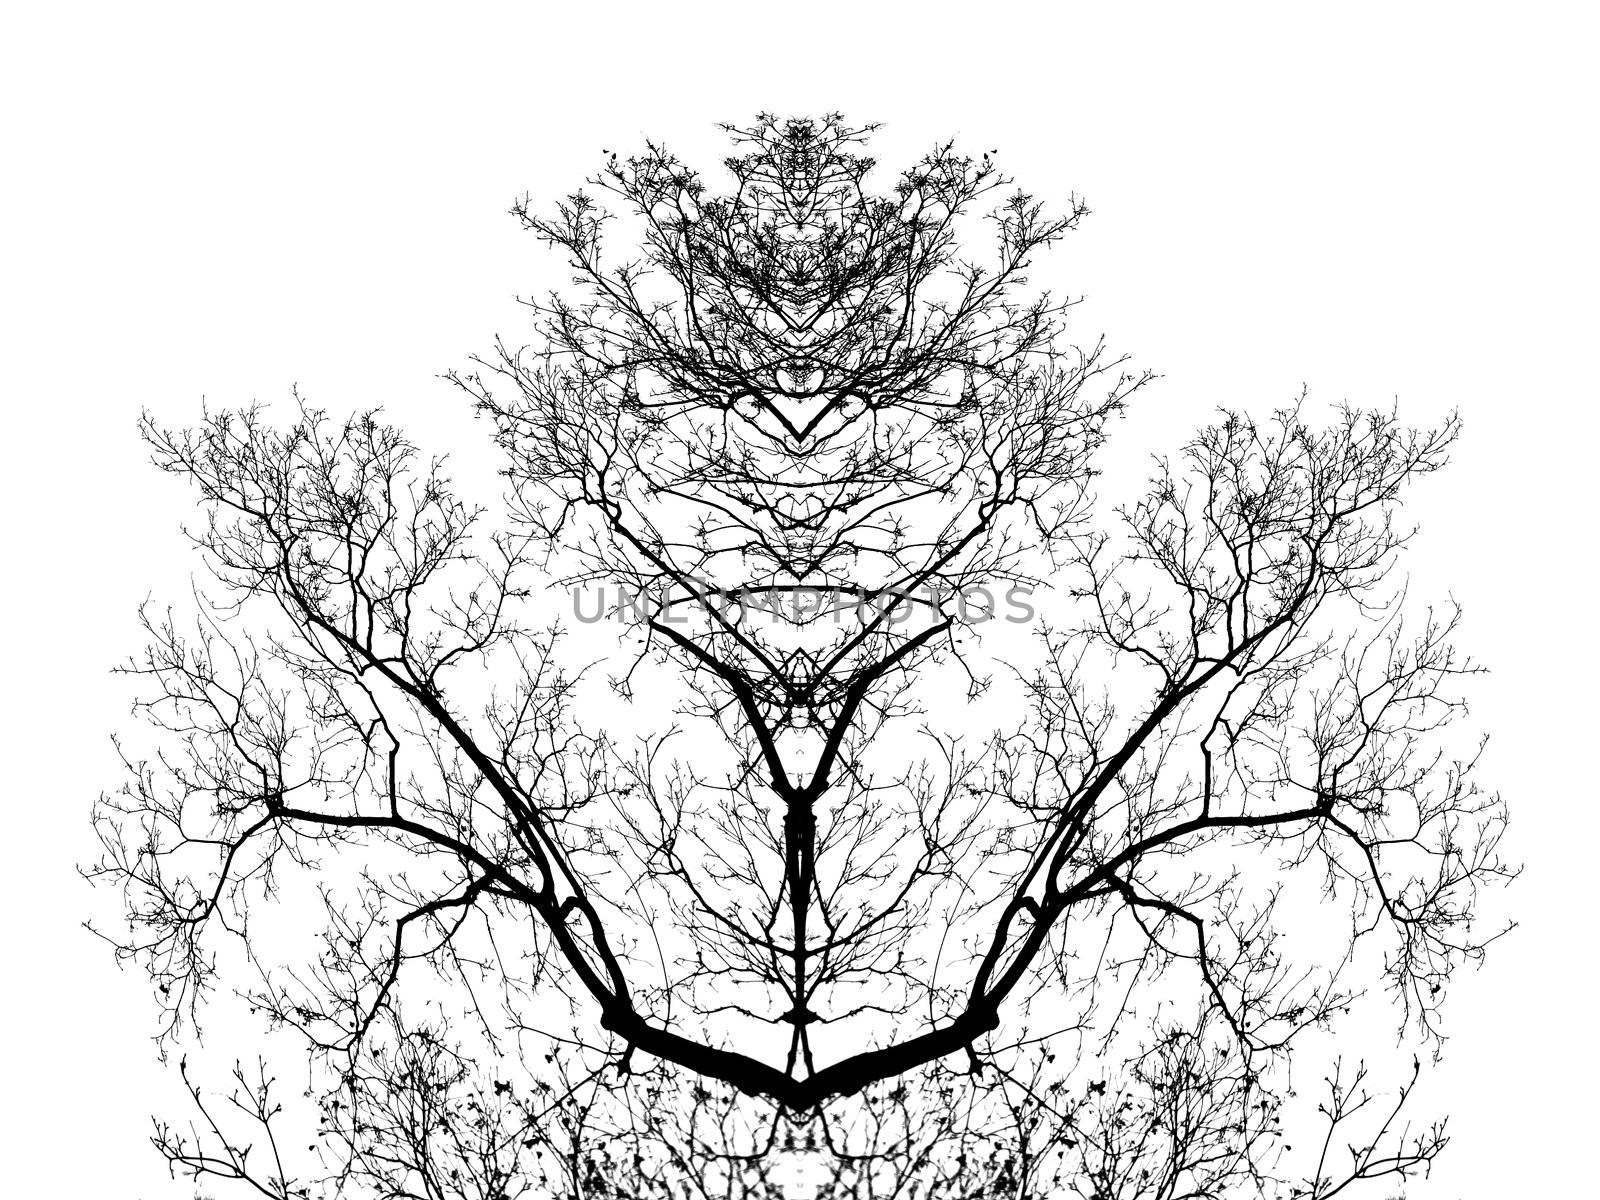 tree branches sulhouettes, isolated on white background